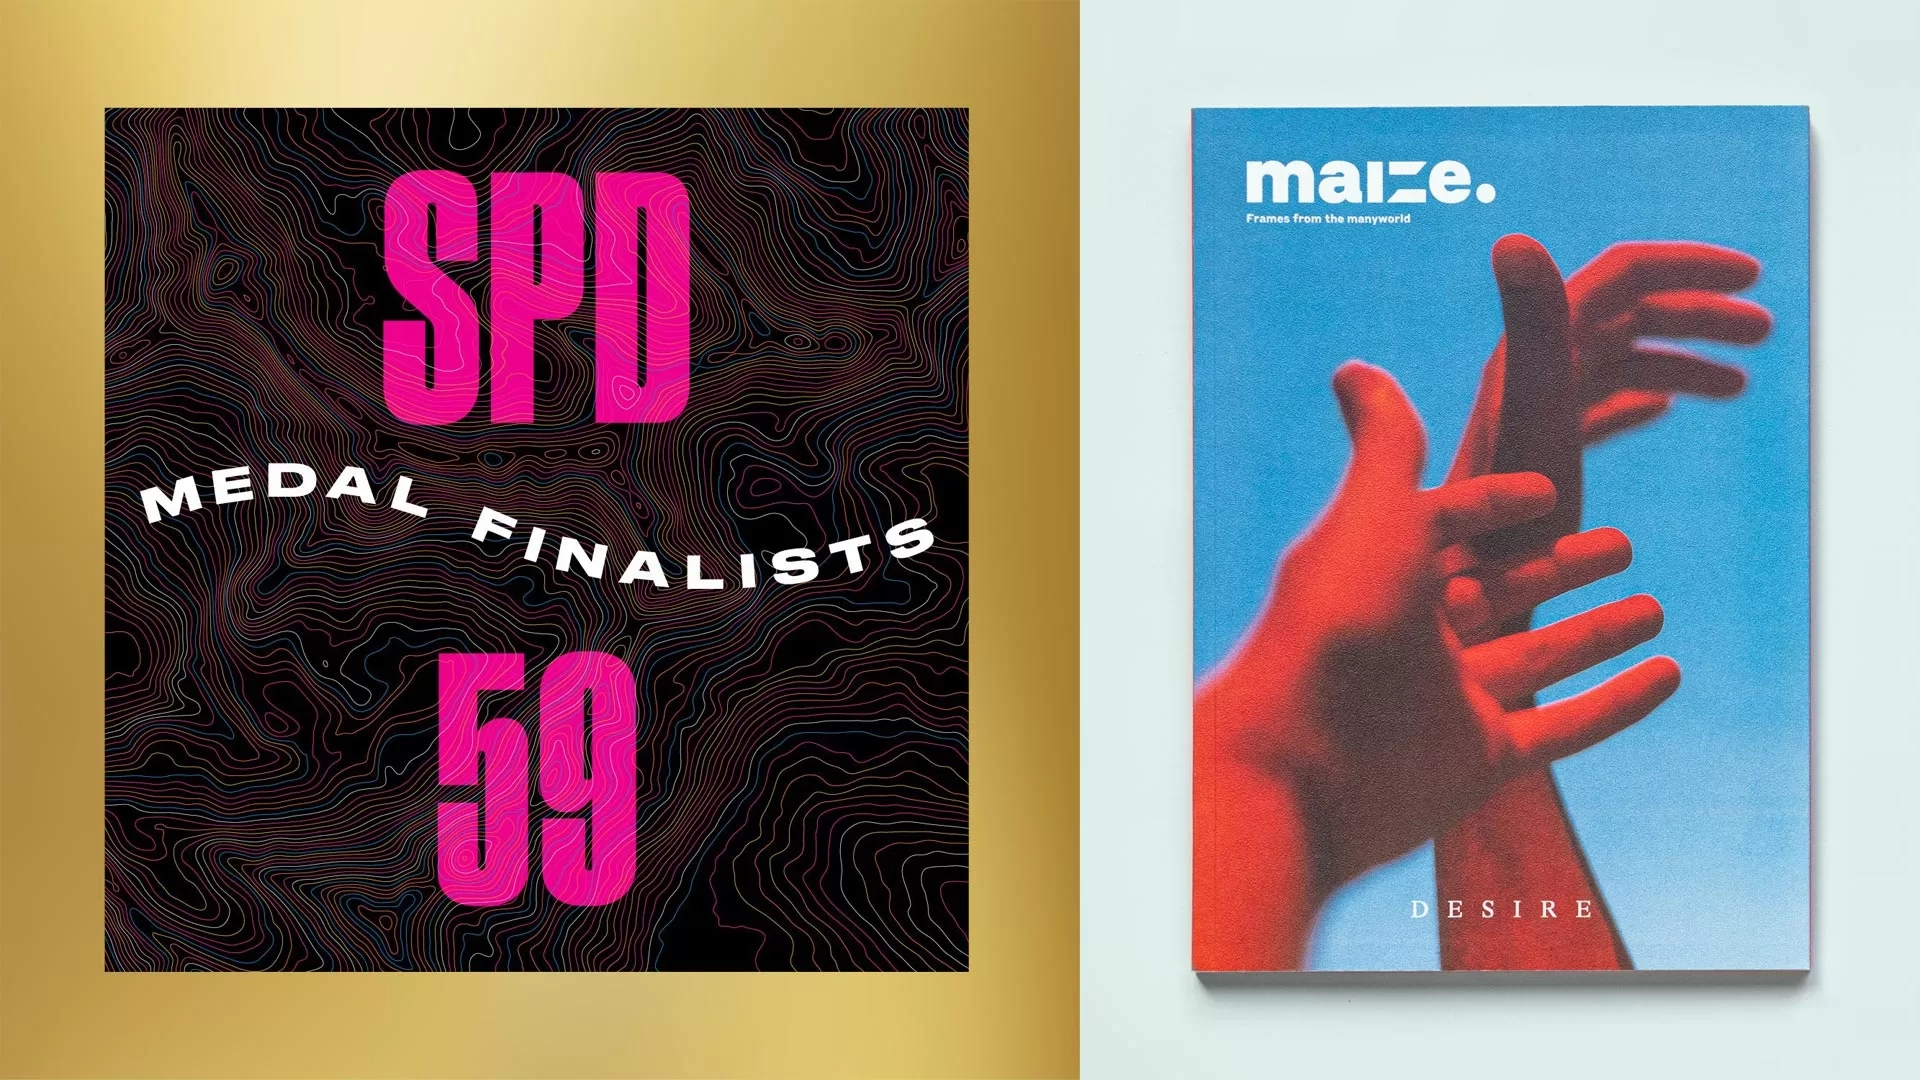 MAIZE magazine is a finalist for the 59th SPD Awards